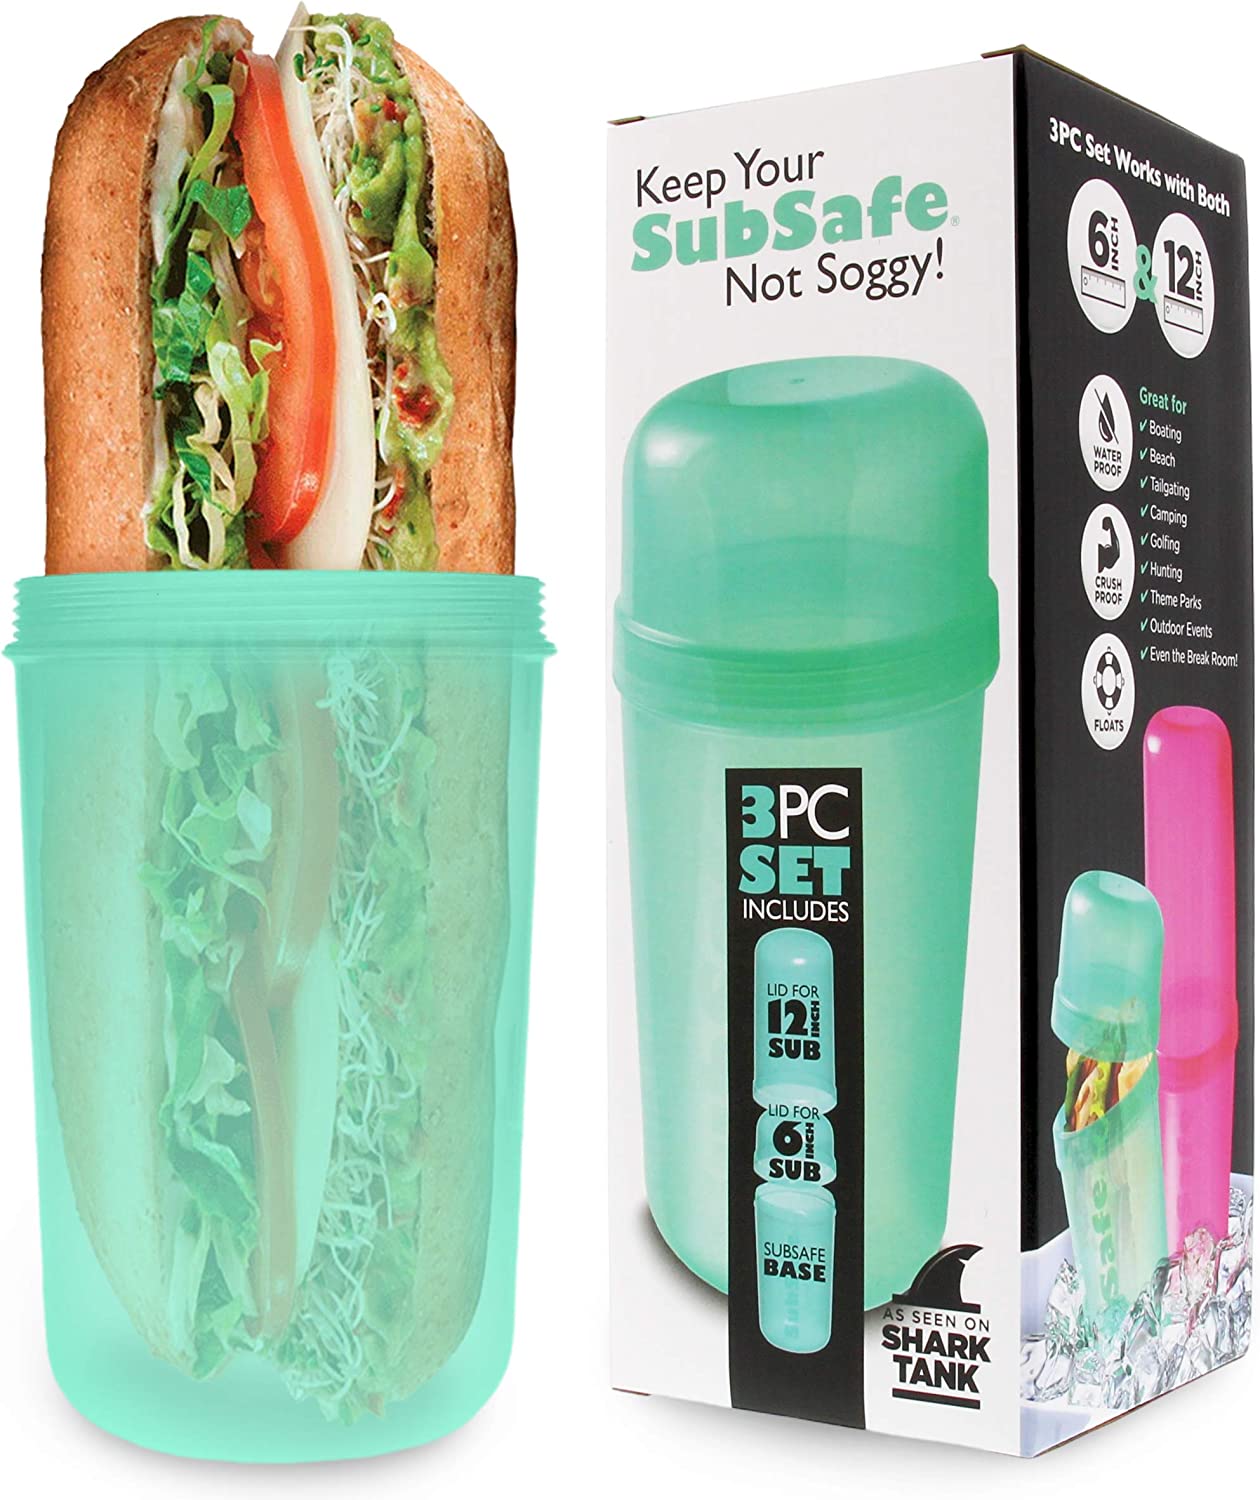 Reusable Sandwich Container Keeps Your Sub Safe, Not Soggy